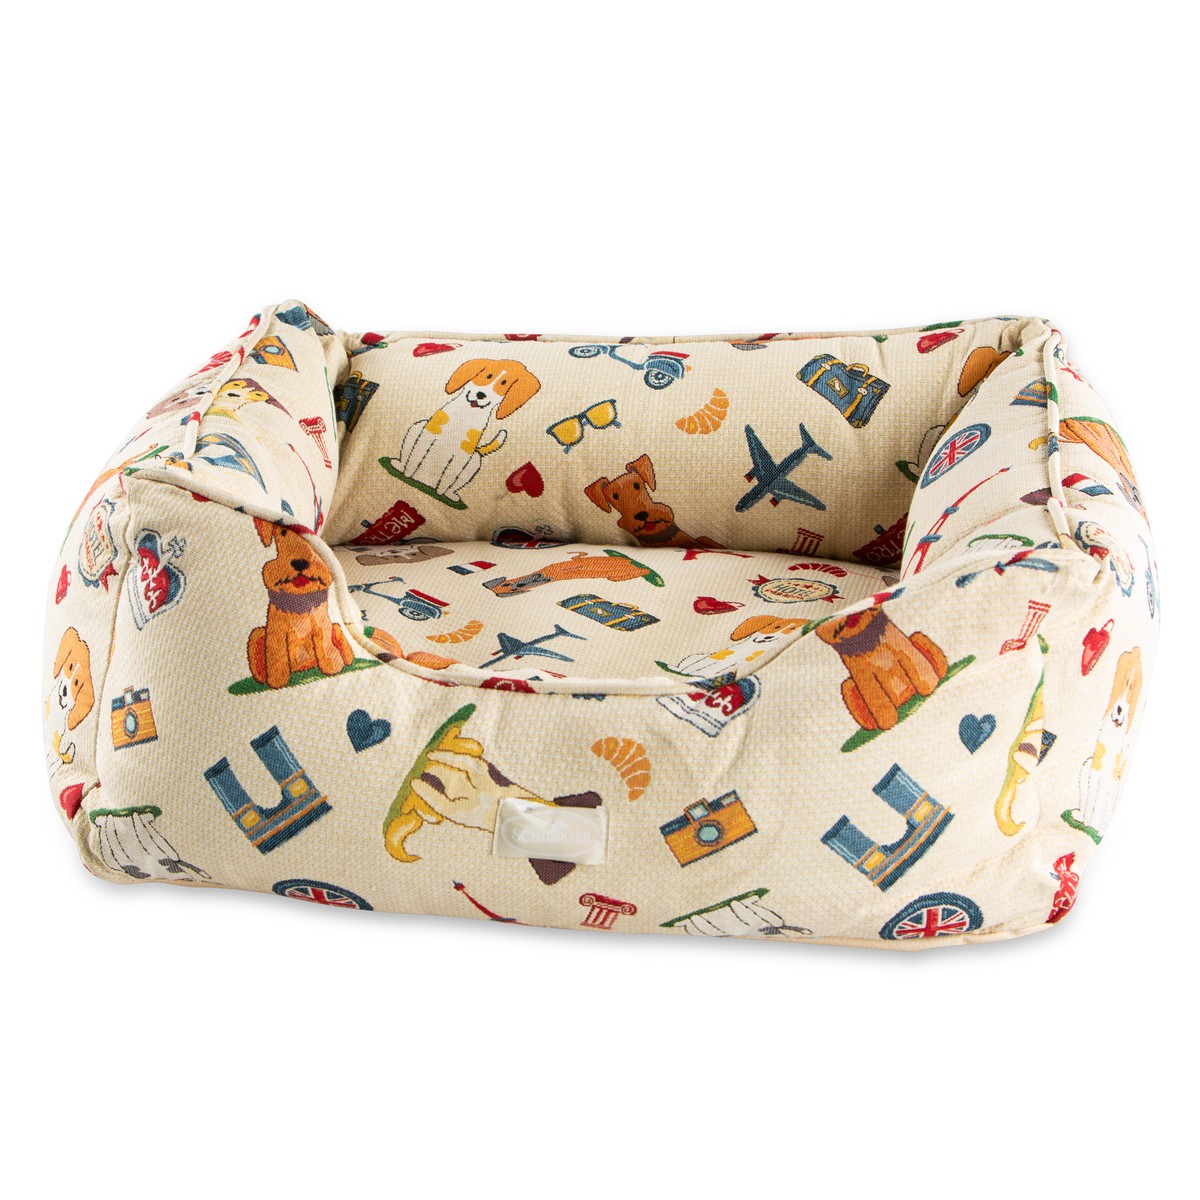  Vilber Coussin Katia Travel Dogs  60x50x27cm